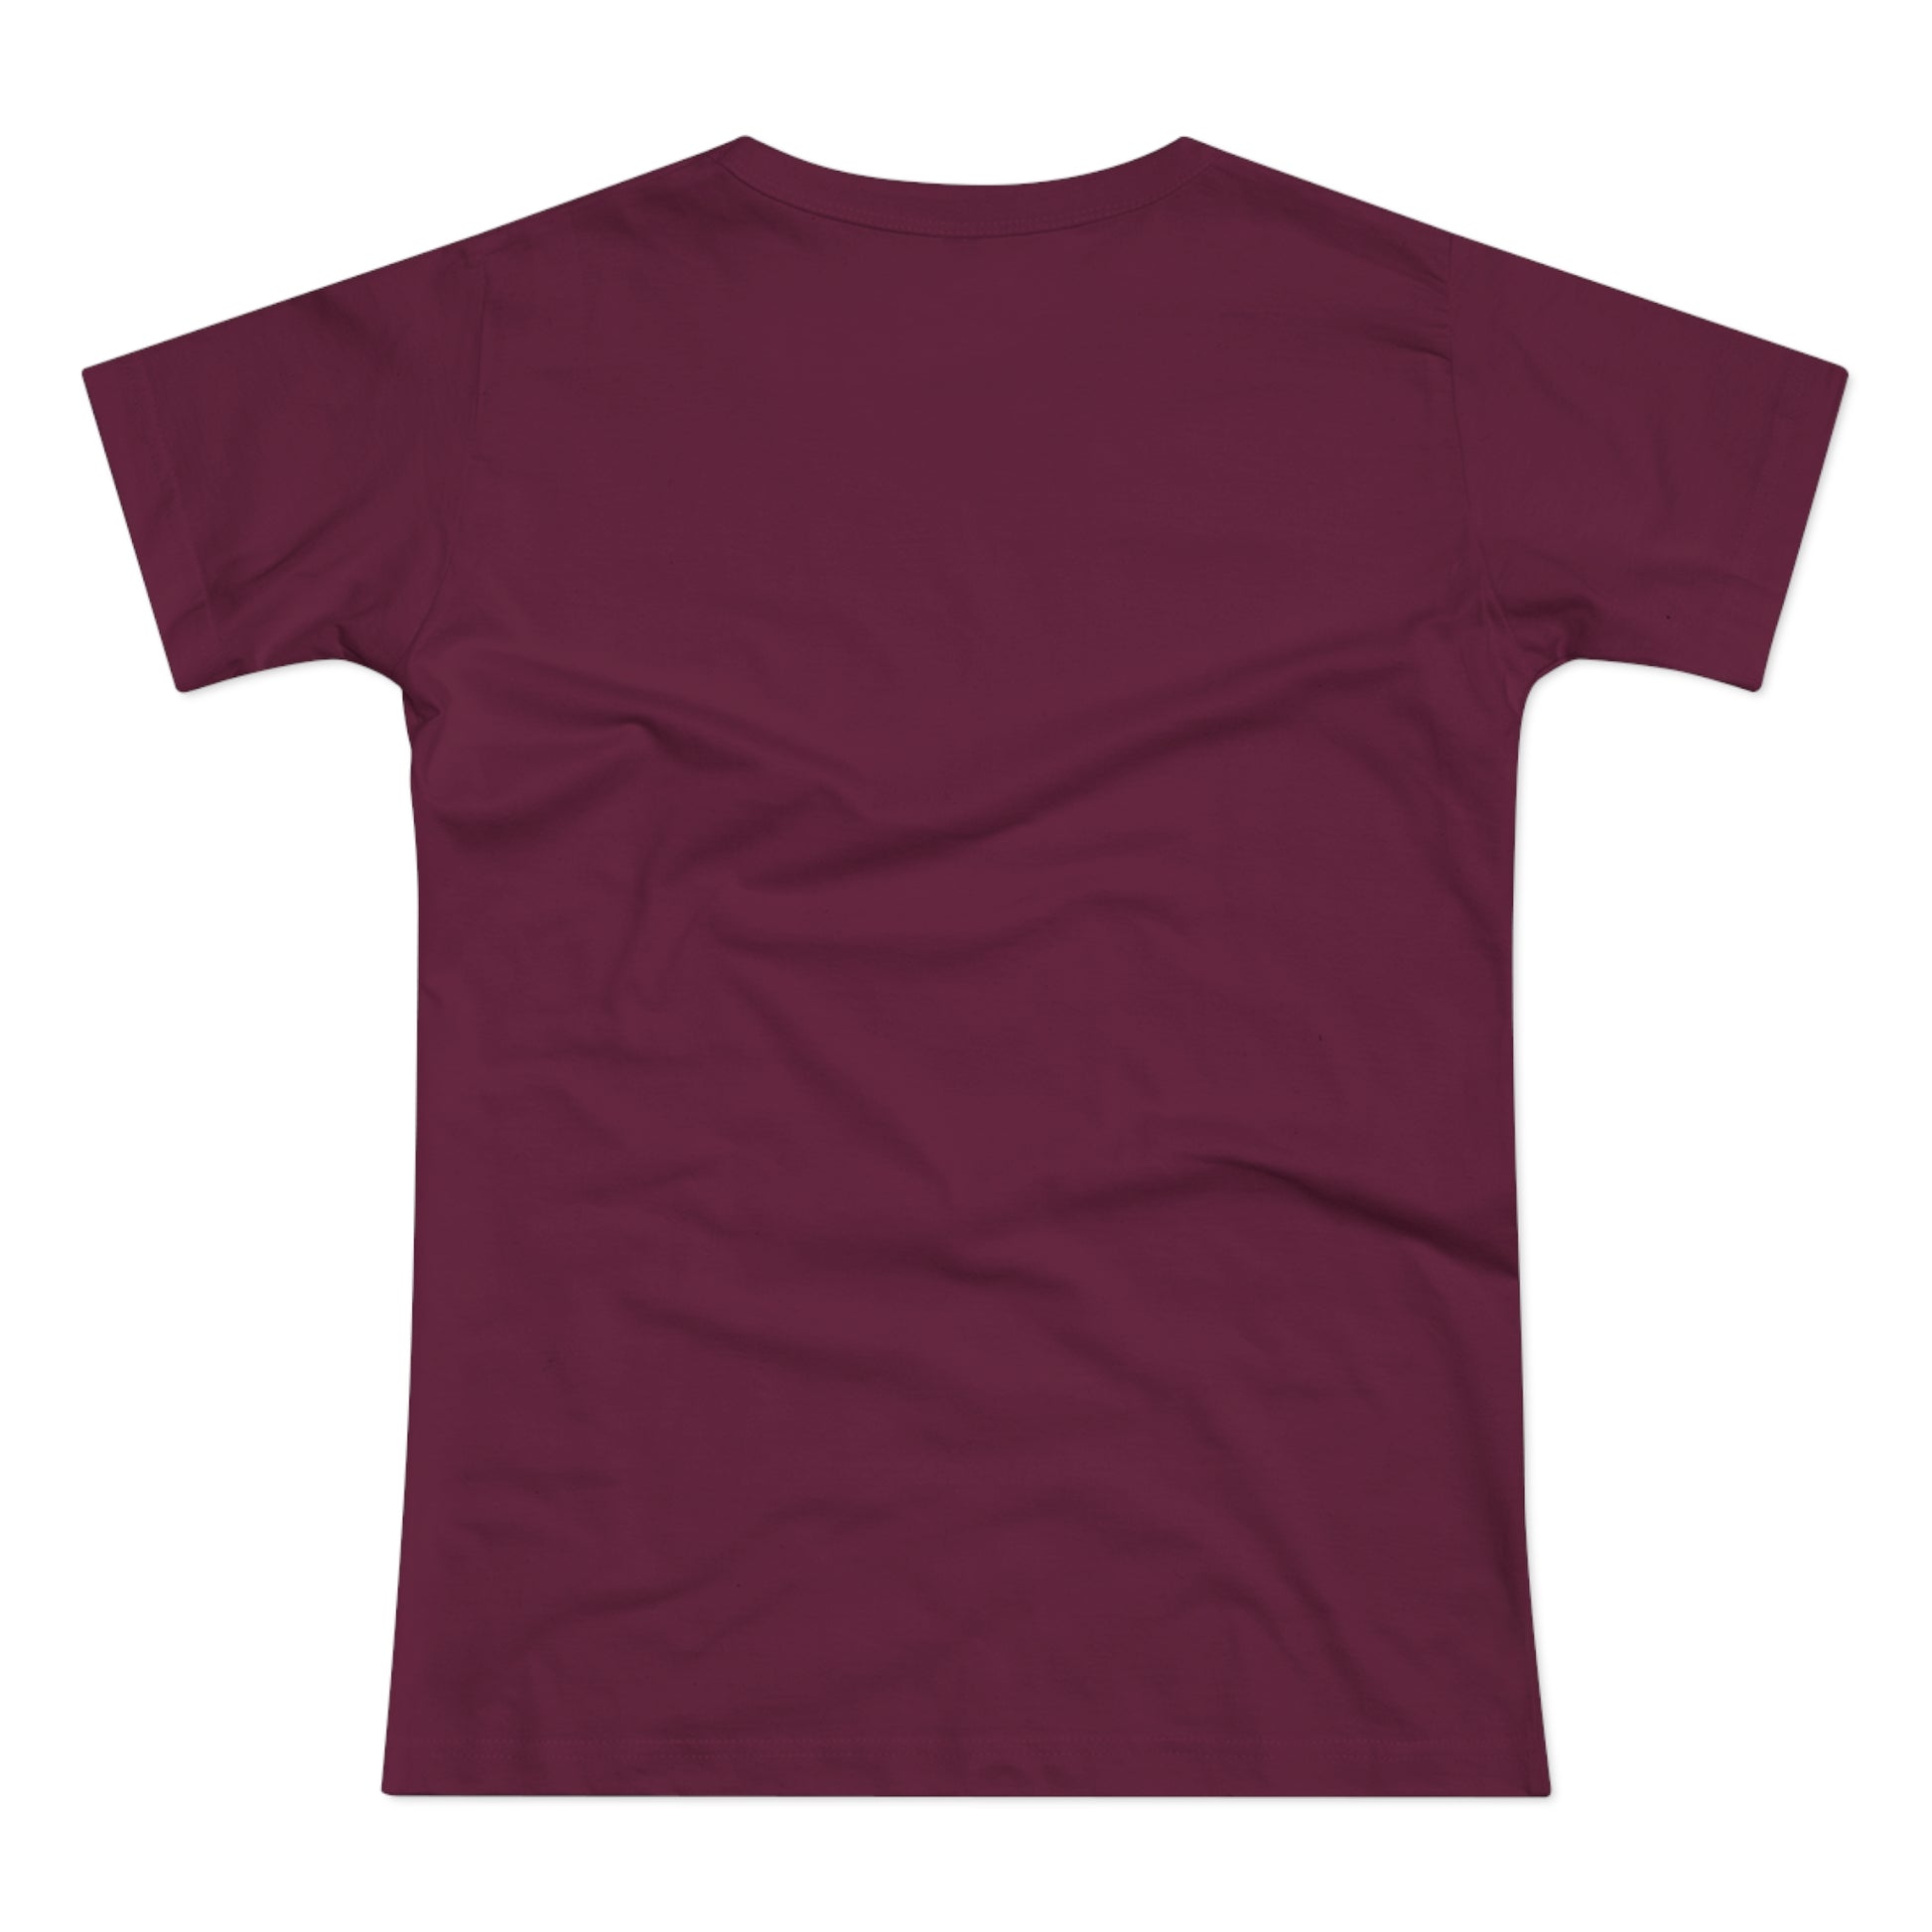 a maroon t - shirt with a white background